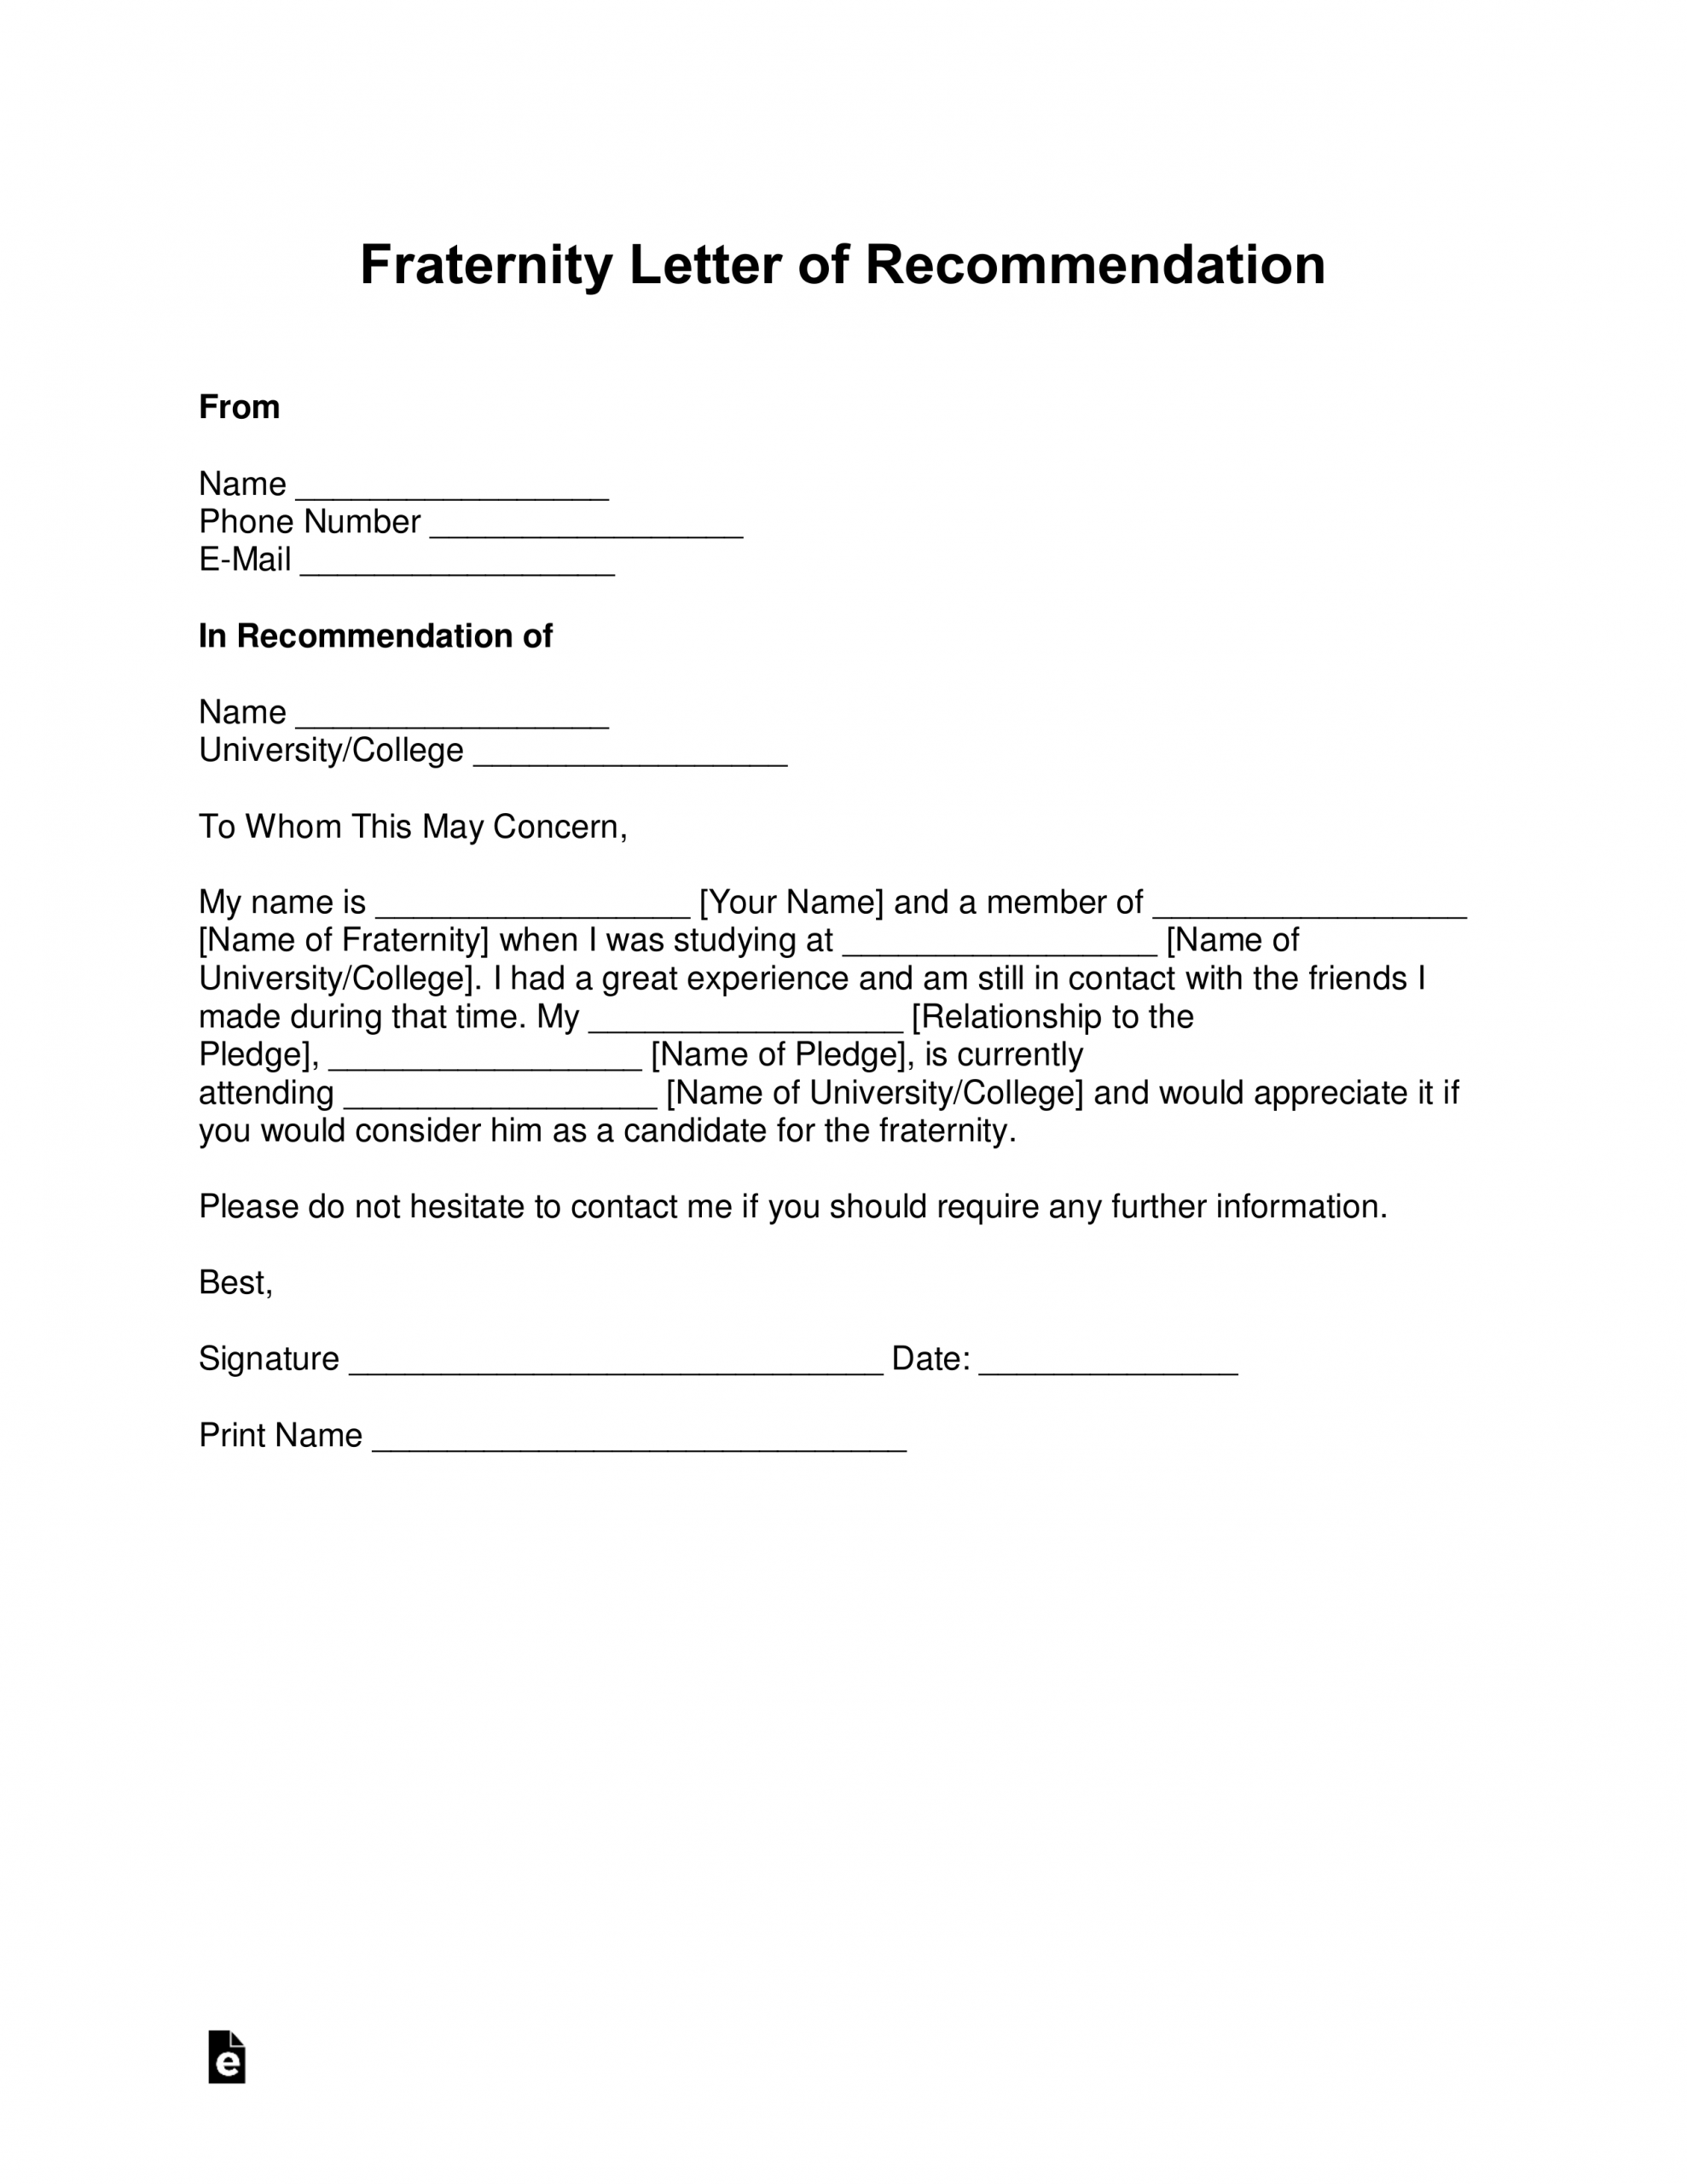 Letter Of Recommendation For Fraternity Example Debandje intended for dimensions 2550 X 3301